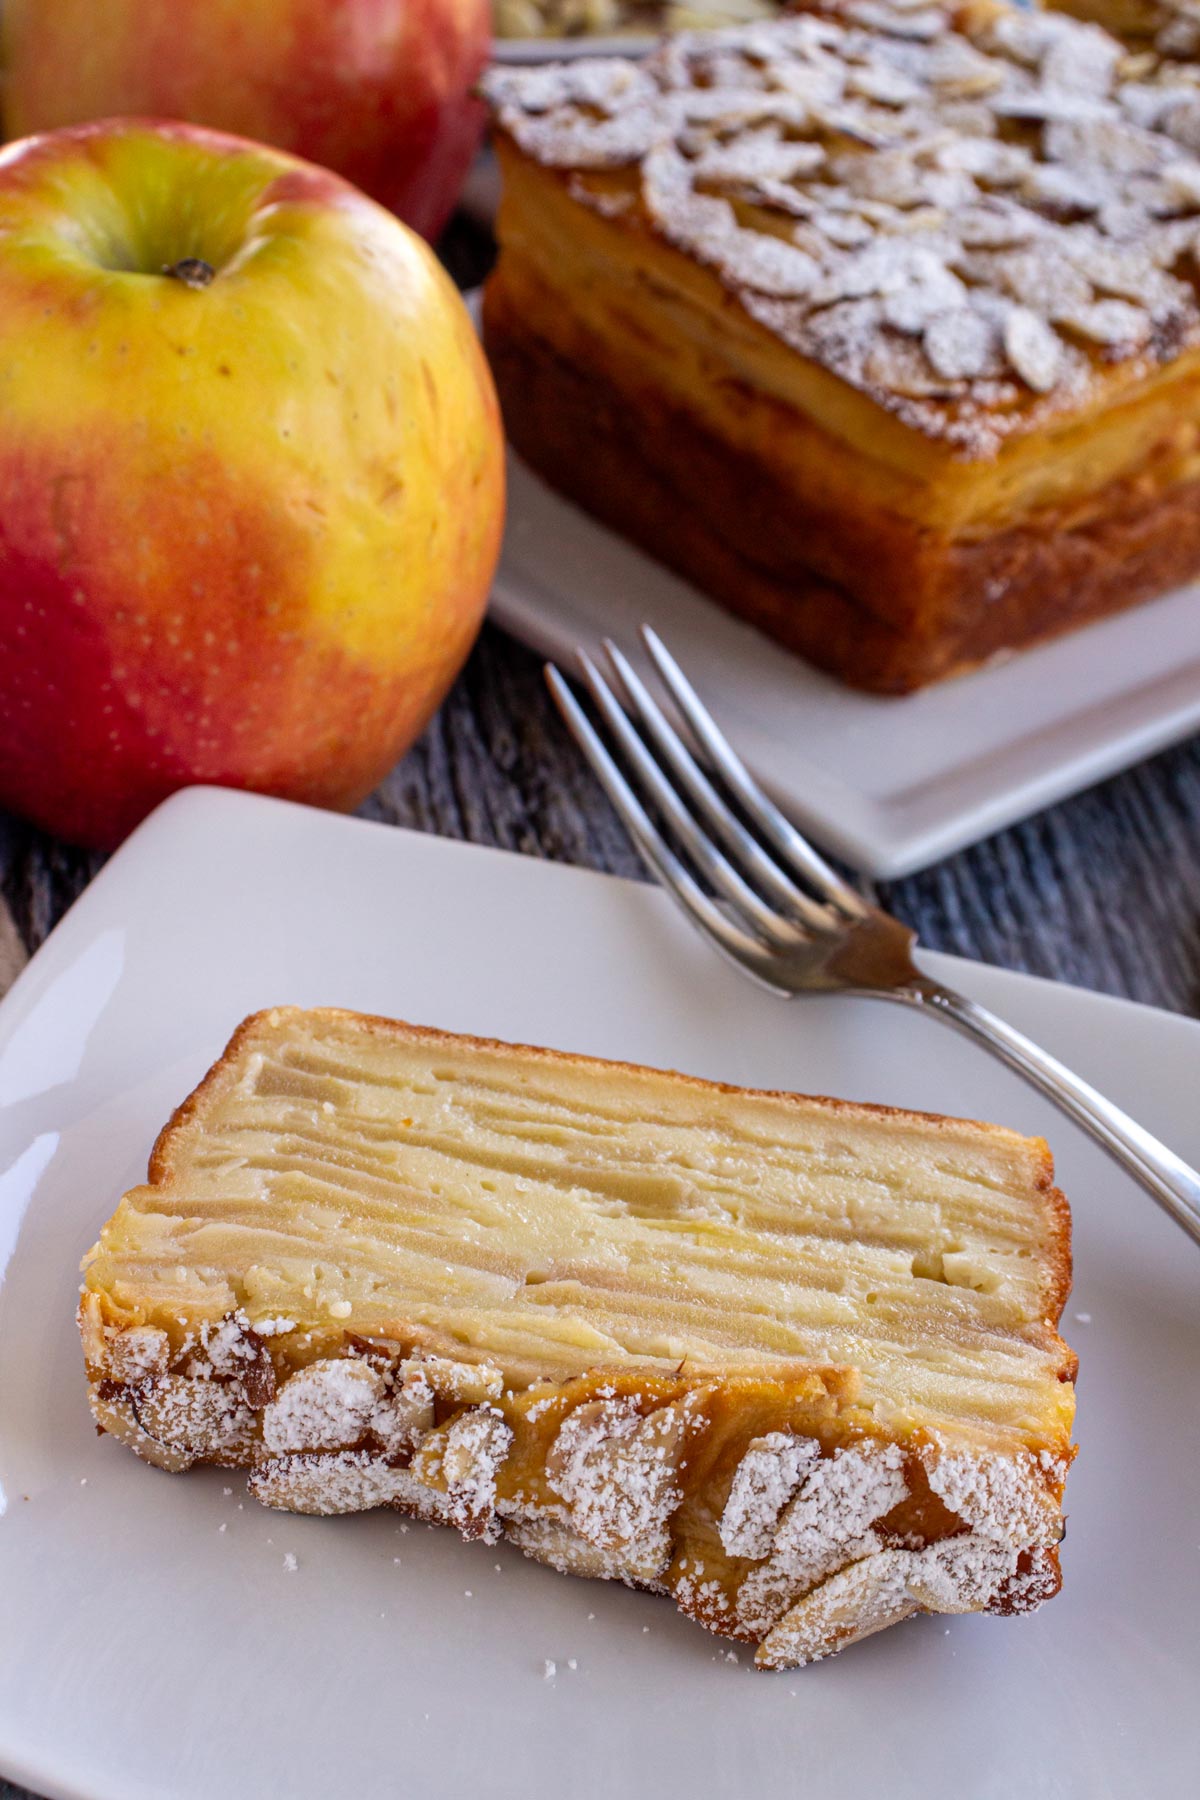 A slice of invisible apple cake topped with sliced almonds and powdered sugar.